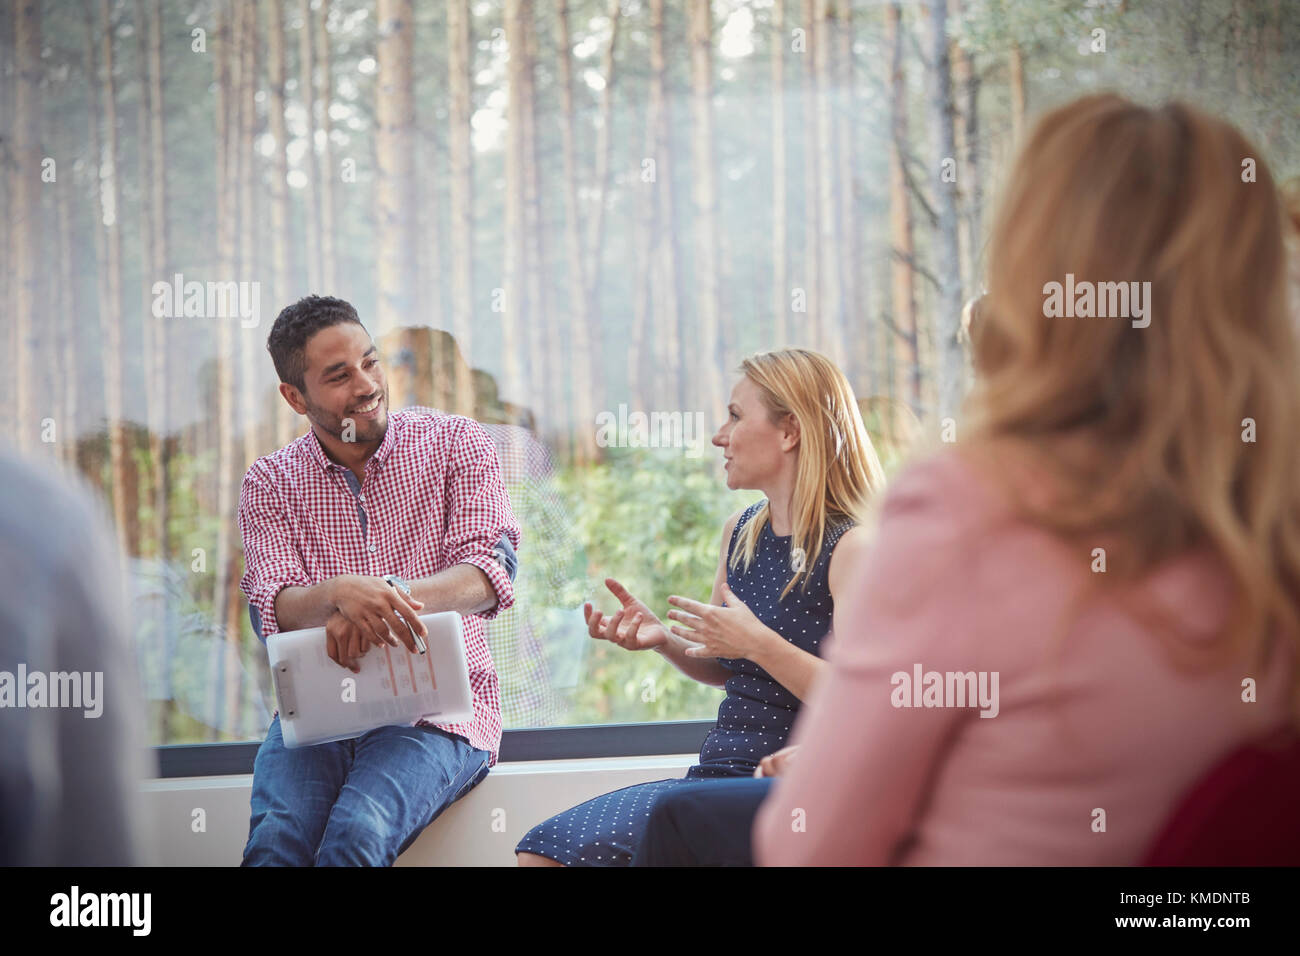 Male therapist listening to talking woman in group therapy session Stock Photo